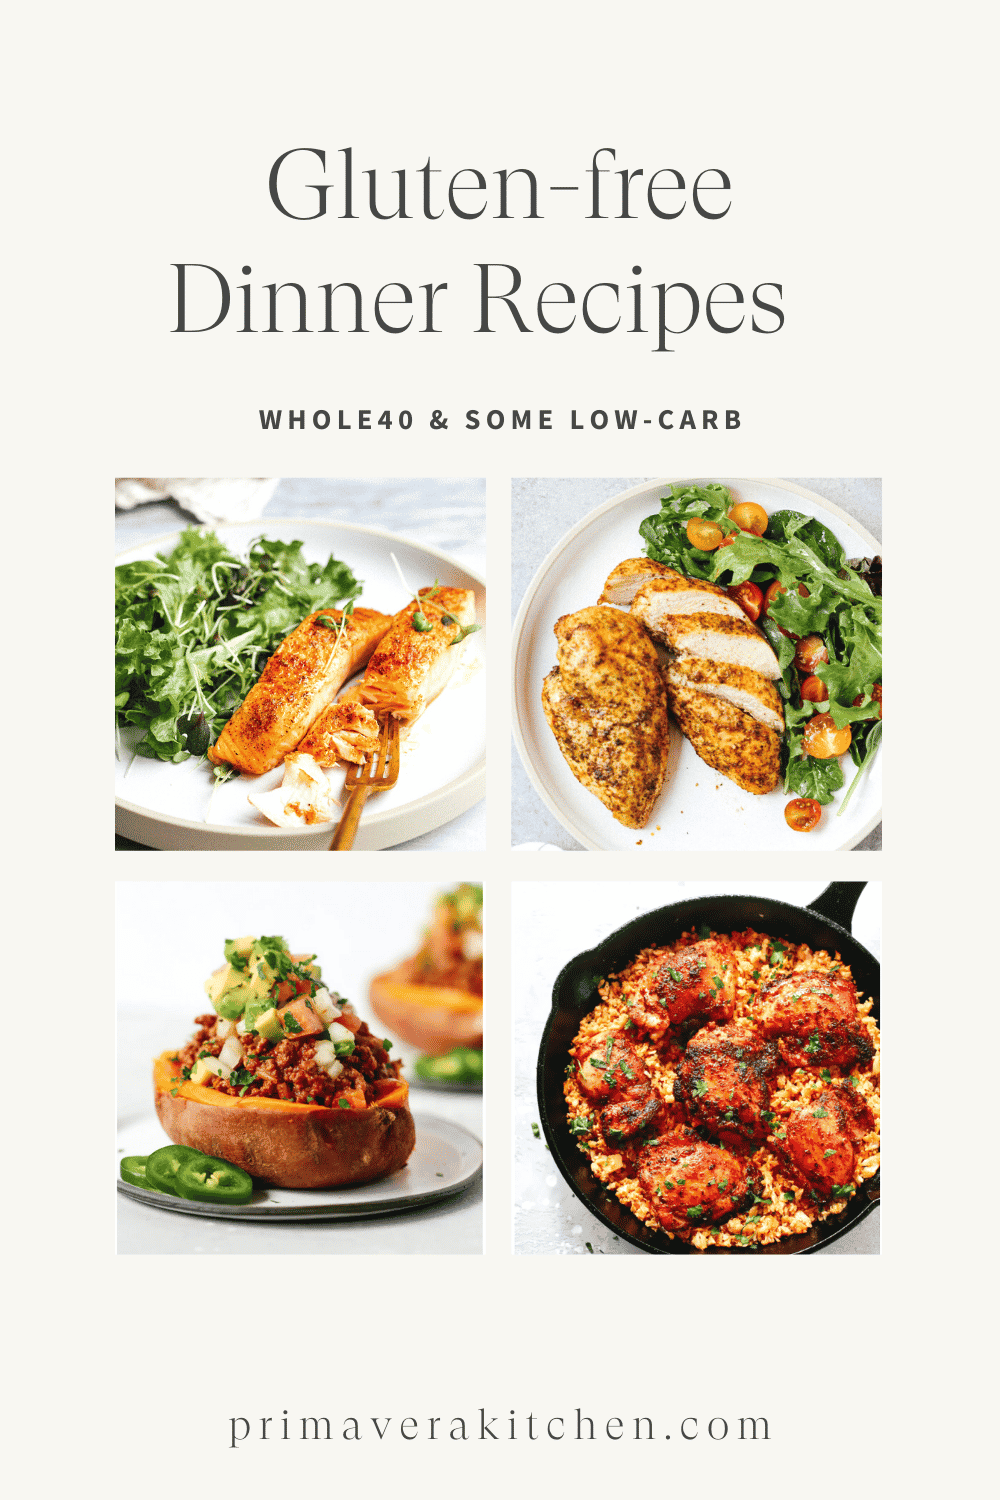 Titled Photo Collage (and shown): Gluten-free Dinner recipes
